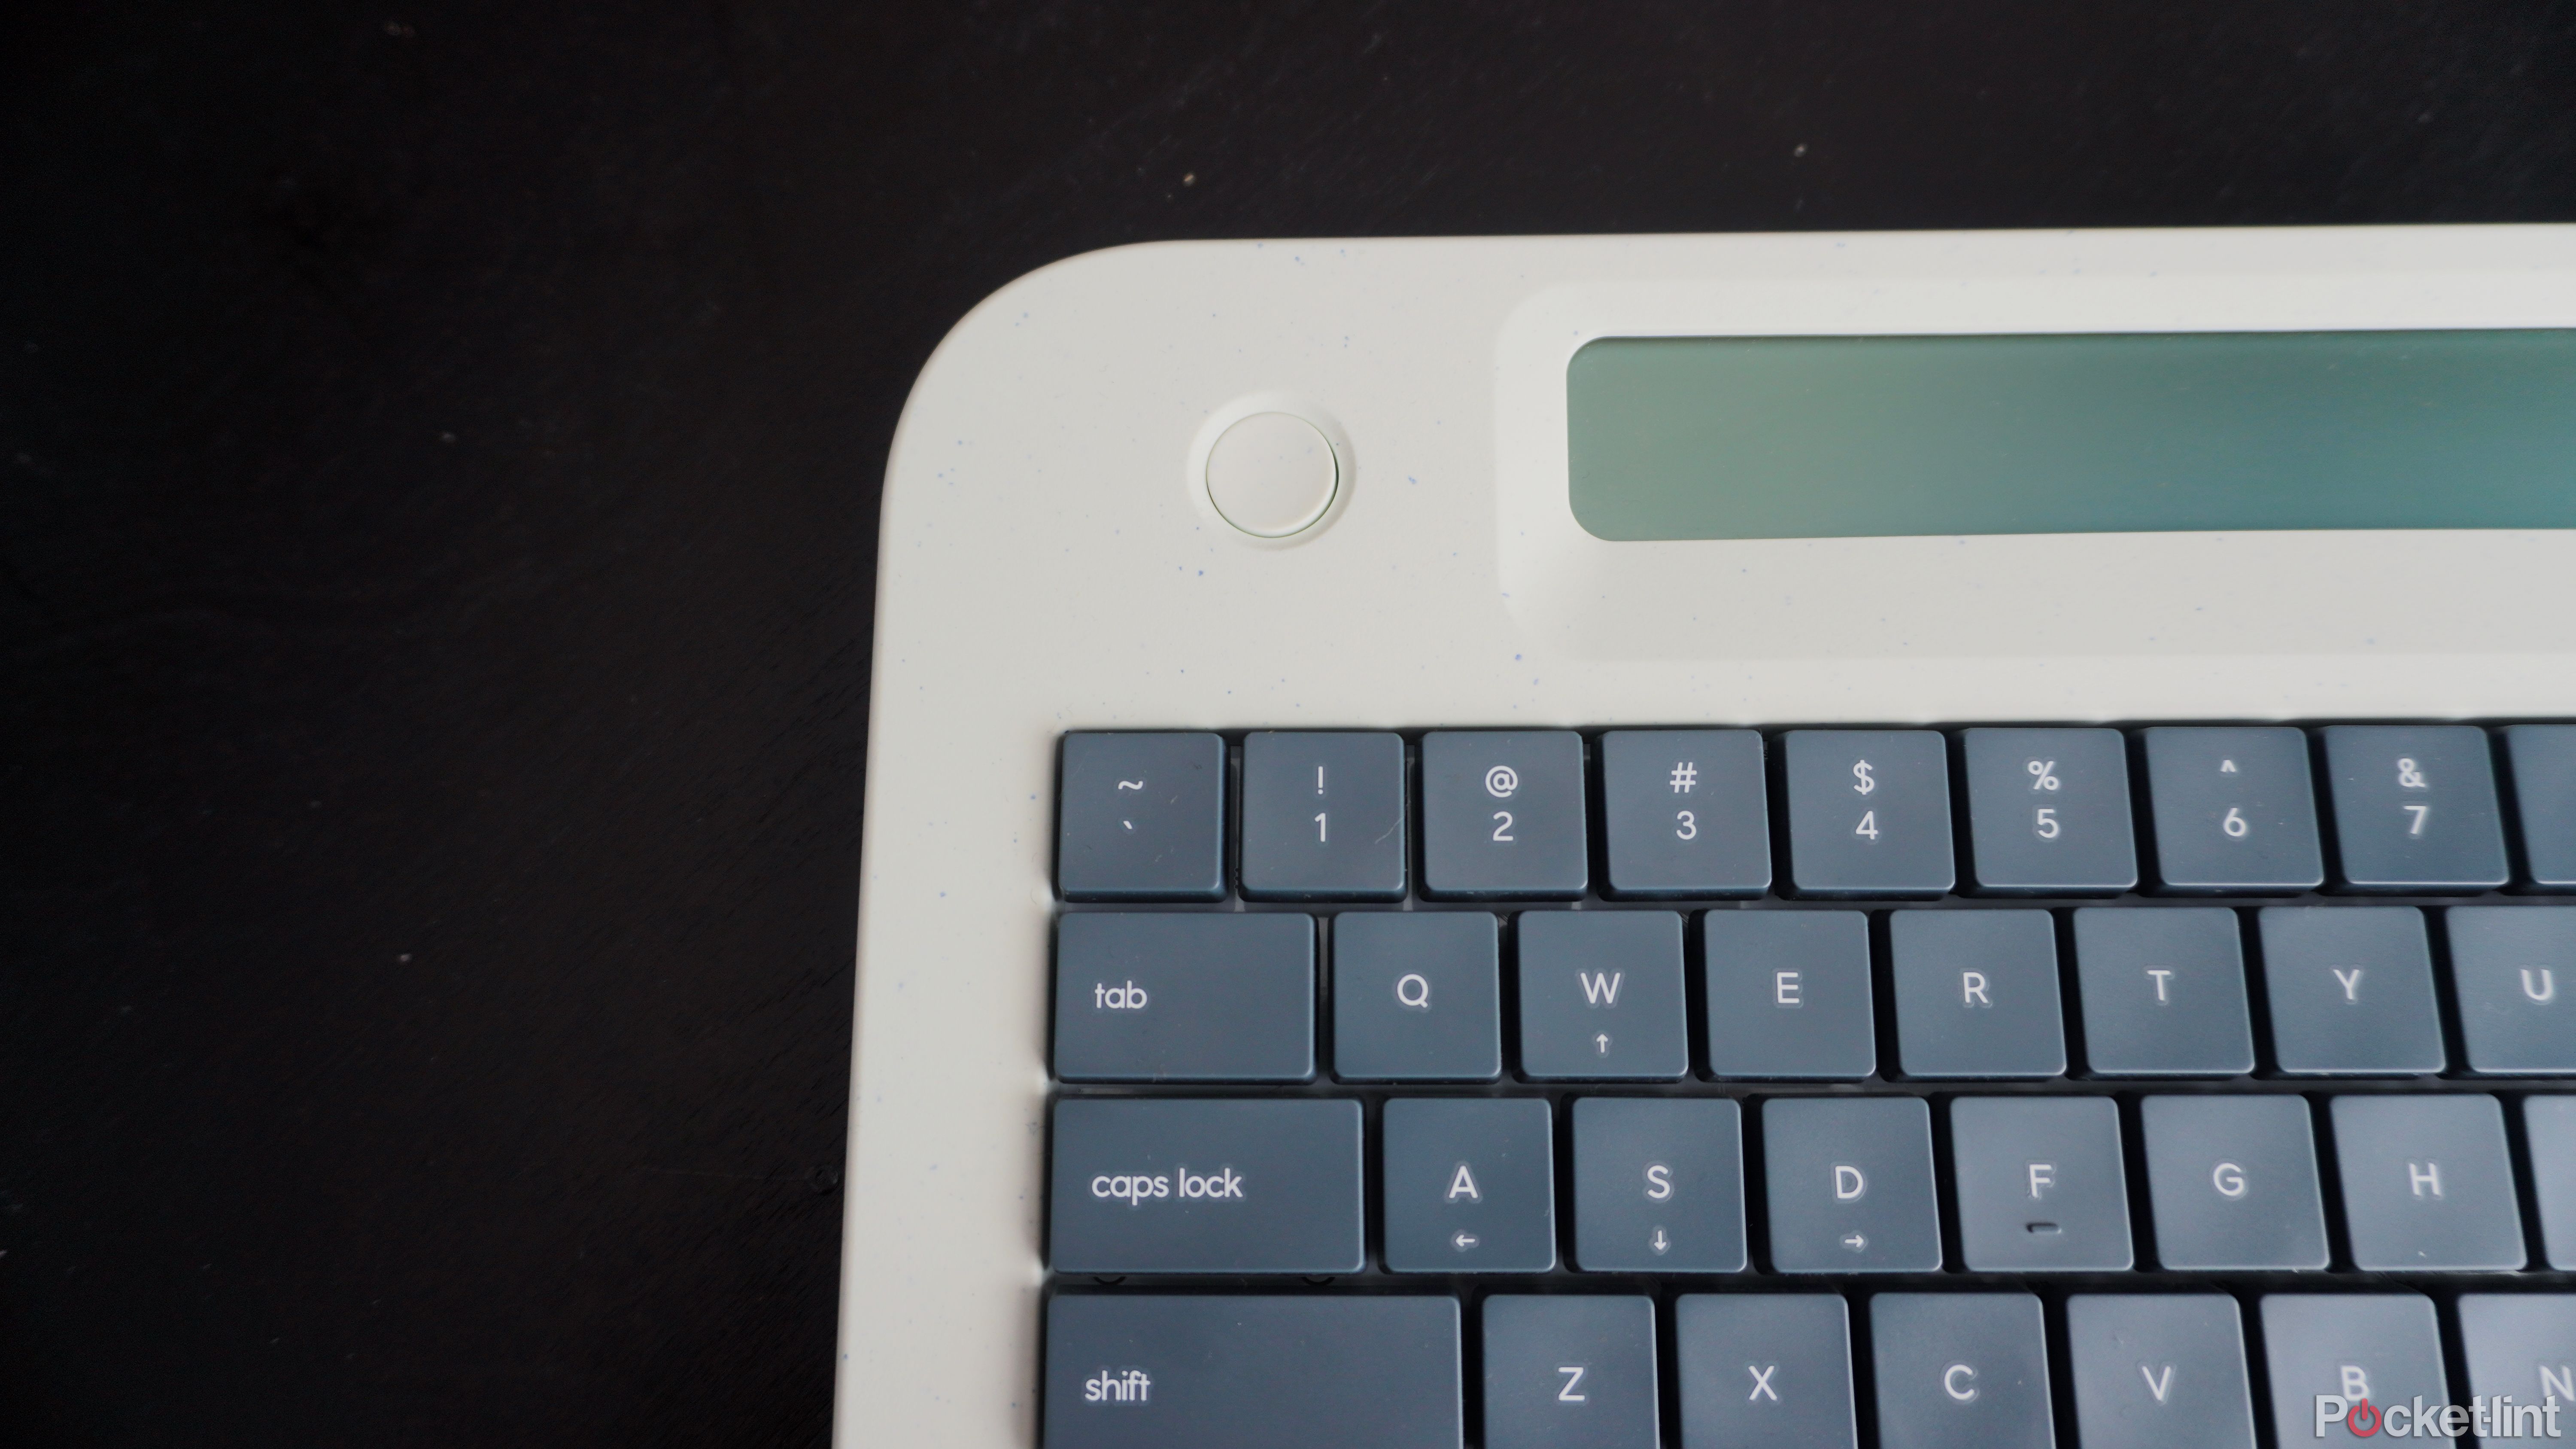 The top left corner of the Freewrite Alpha with power button and keys visible.